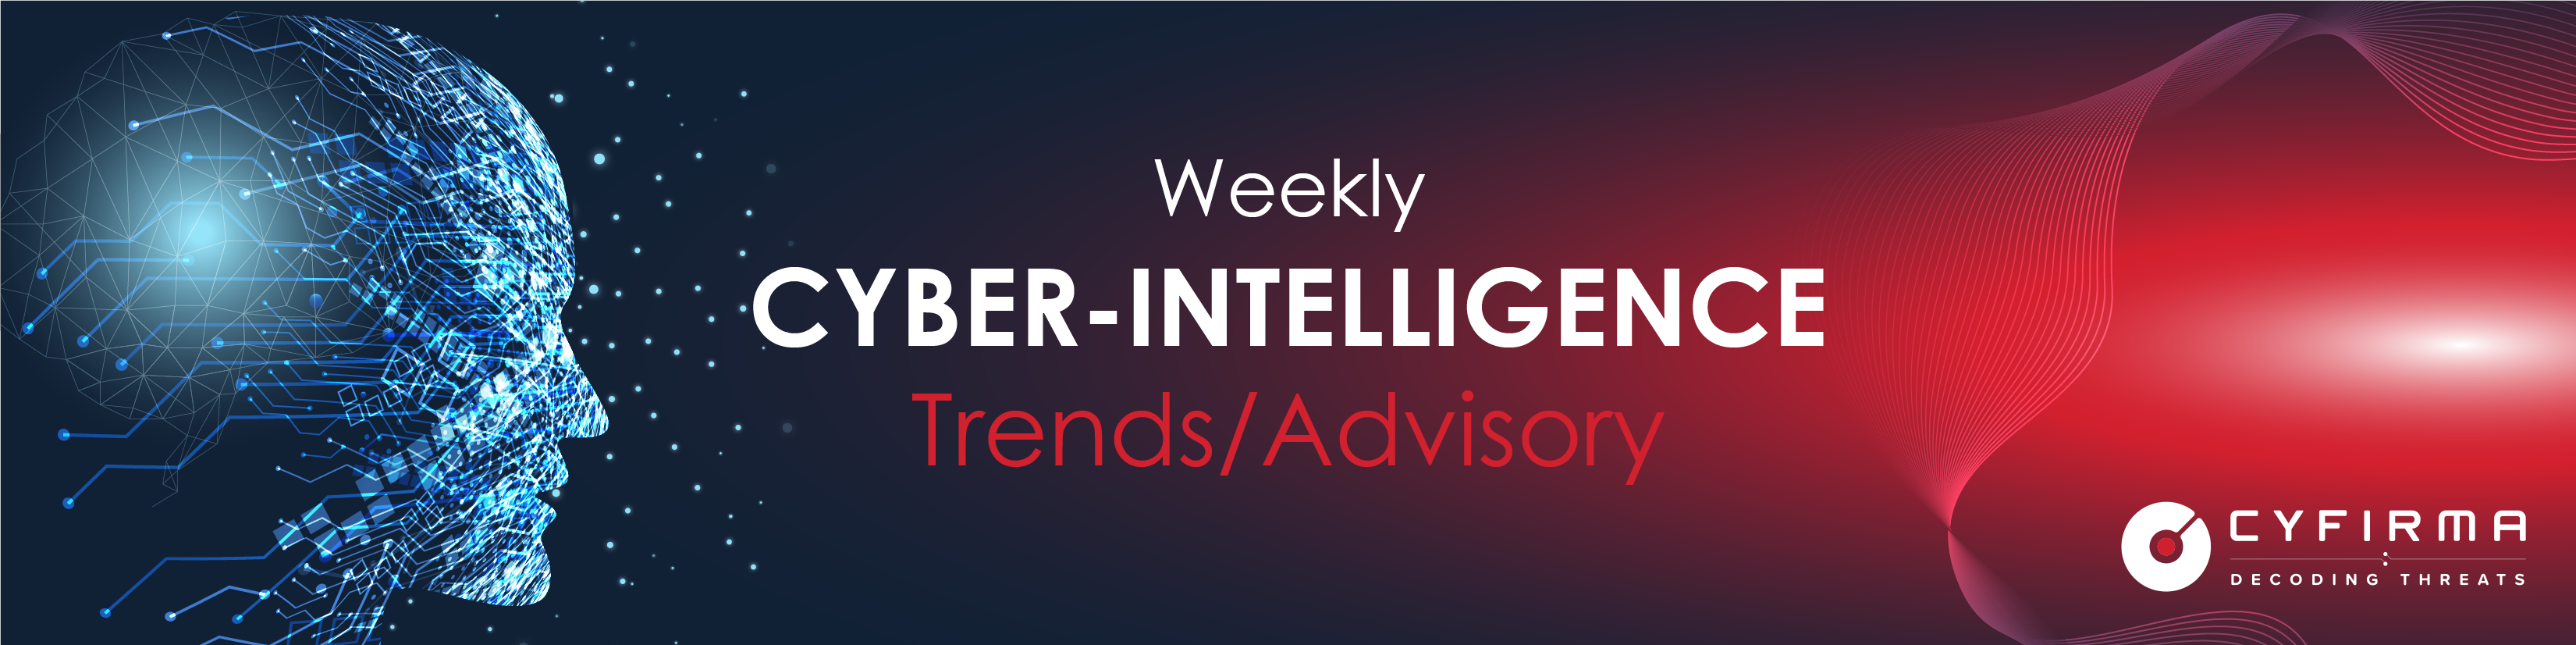 Weekly Cyber-Intelligence Trends and Advisory – 16 Apr 2022